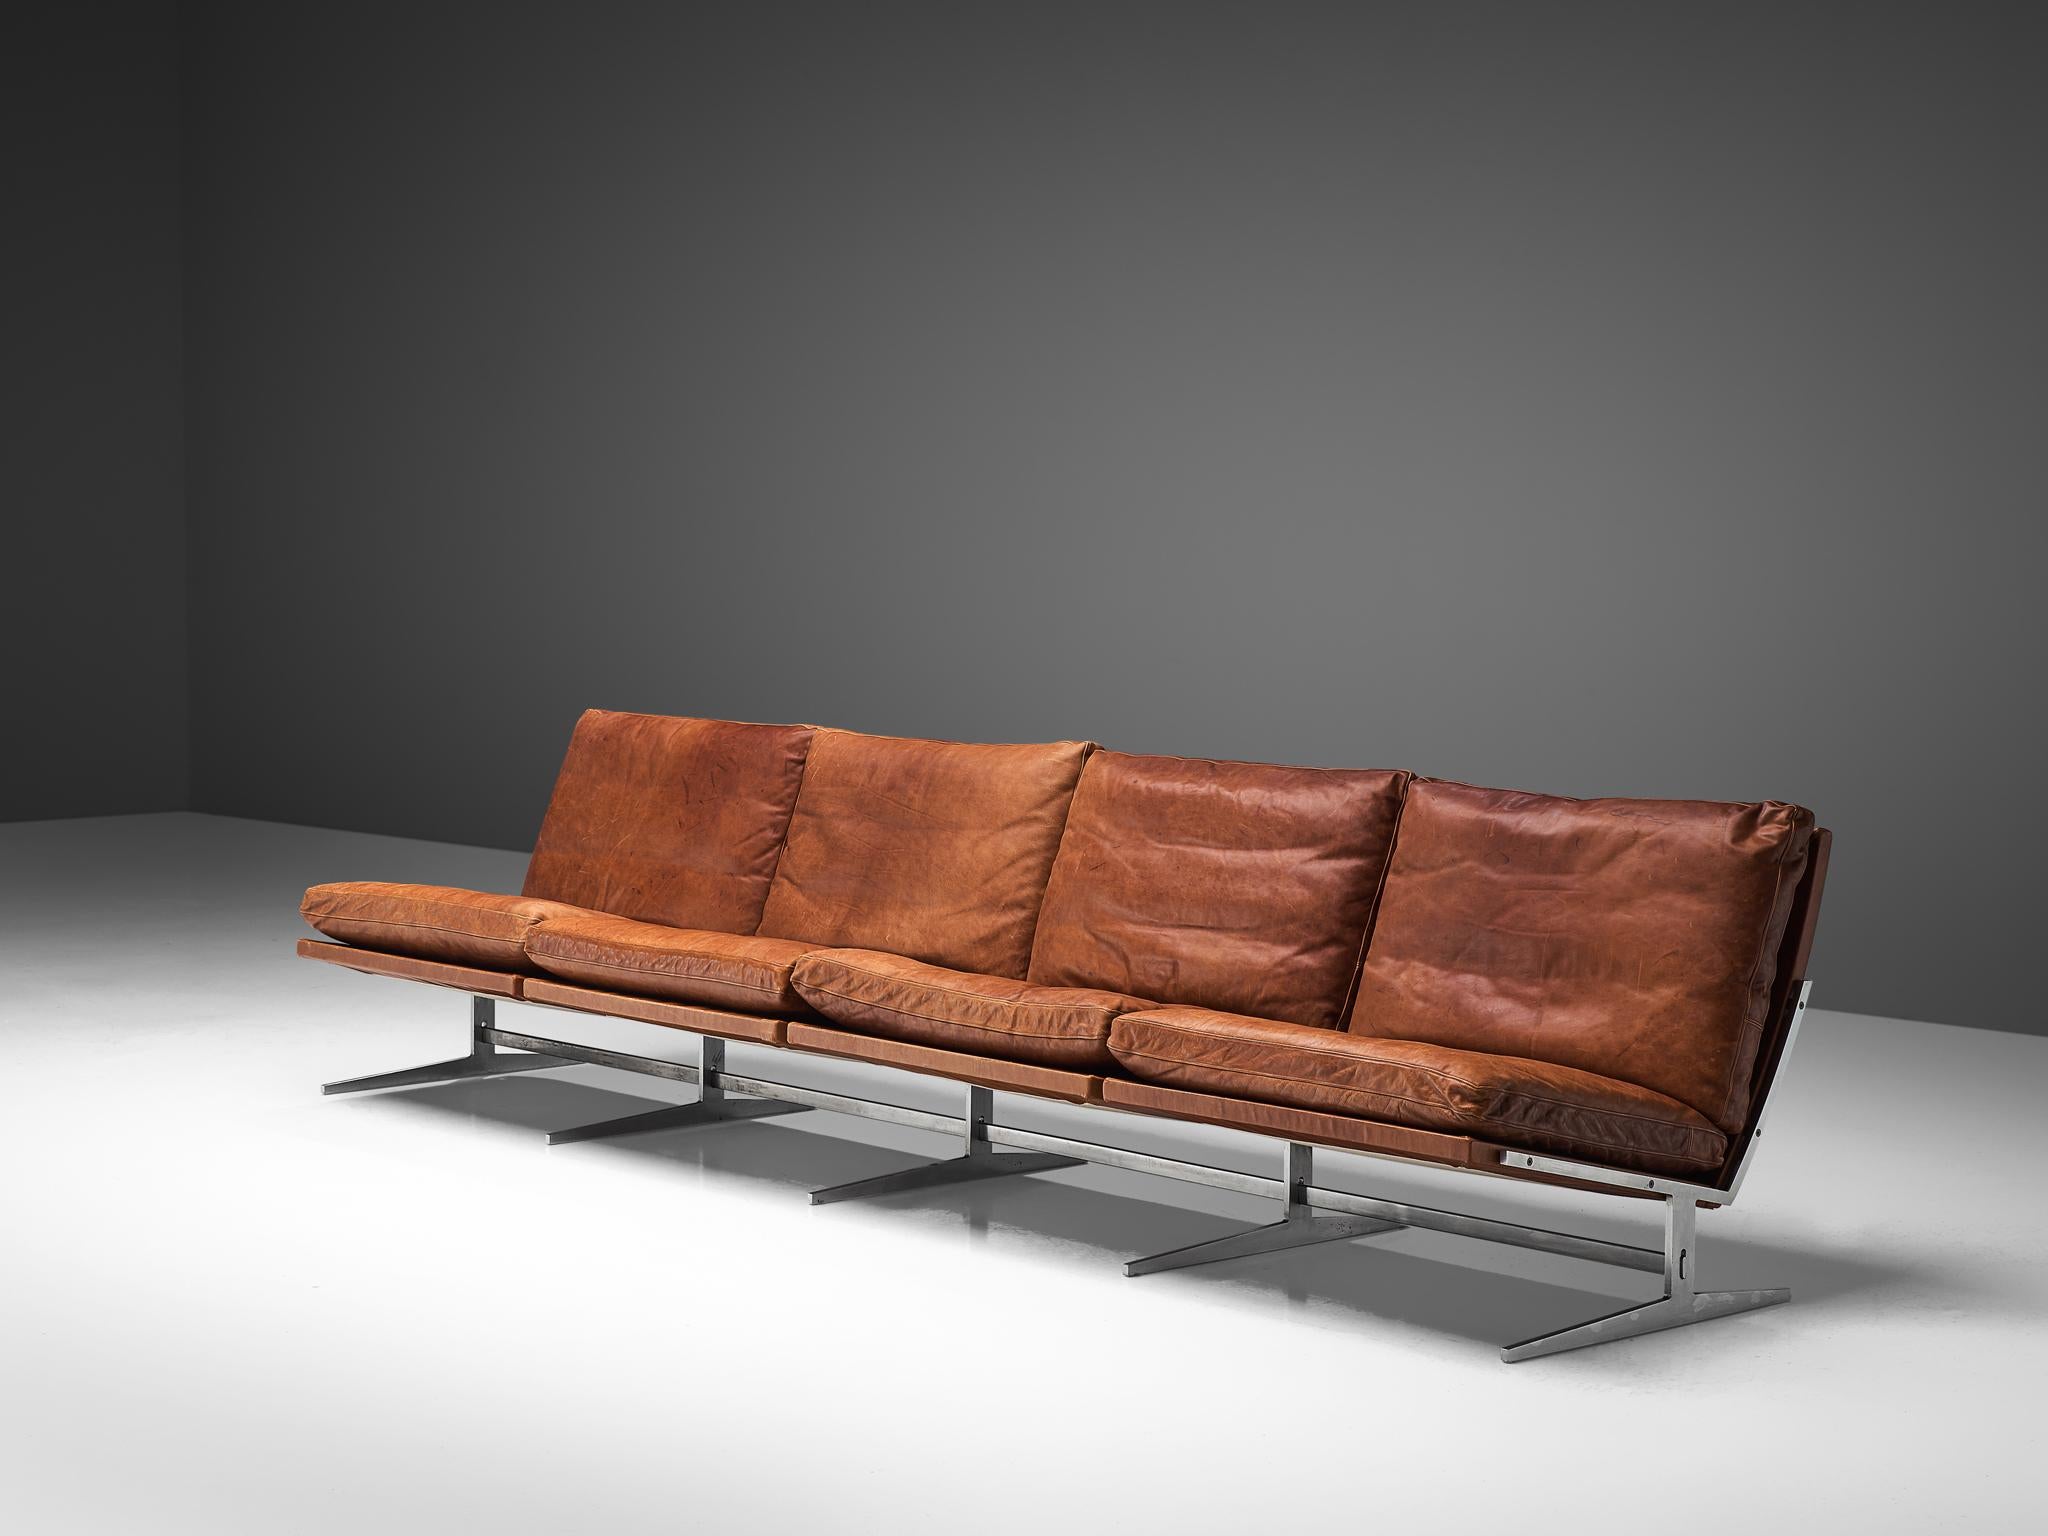 Preben Fabricius & Jørgen Kastholm, sofa model BO561, brushed steel and cognac leather, Denmark, 1962. 

This modern slipper sofa is made out of steel and leather. Besides this slick and Minimalist design, the midcentury sofa is suprisingly